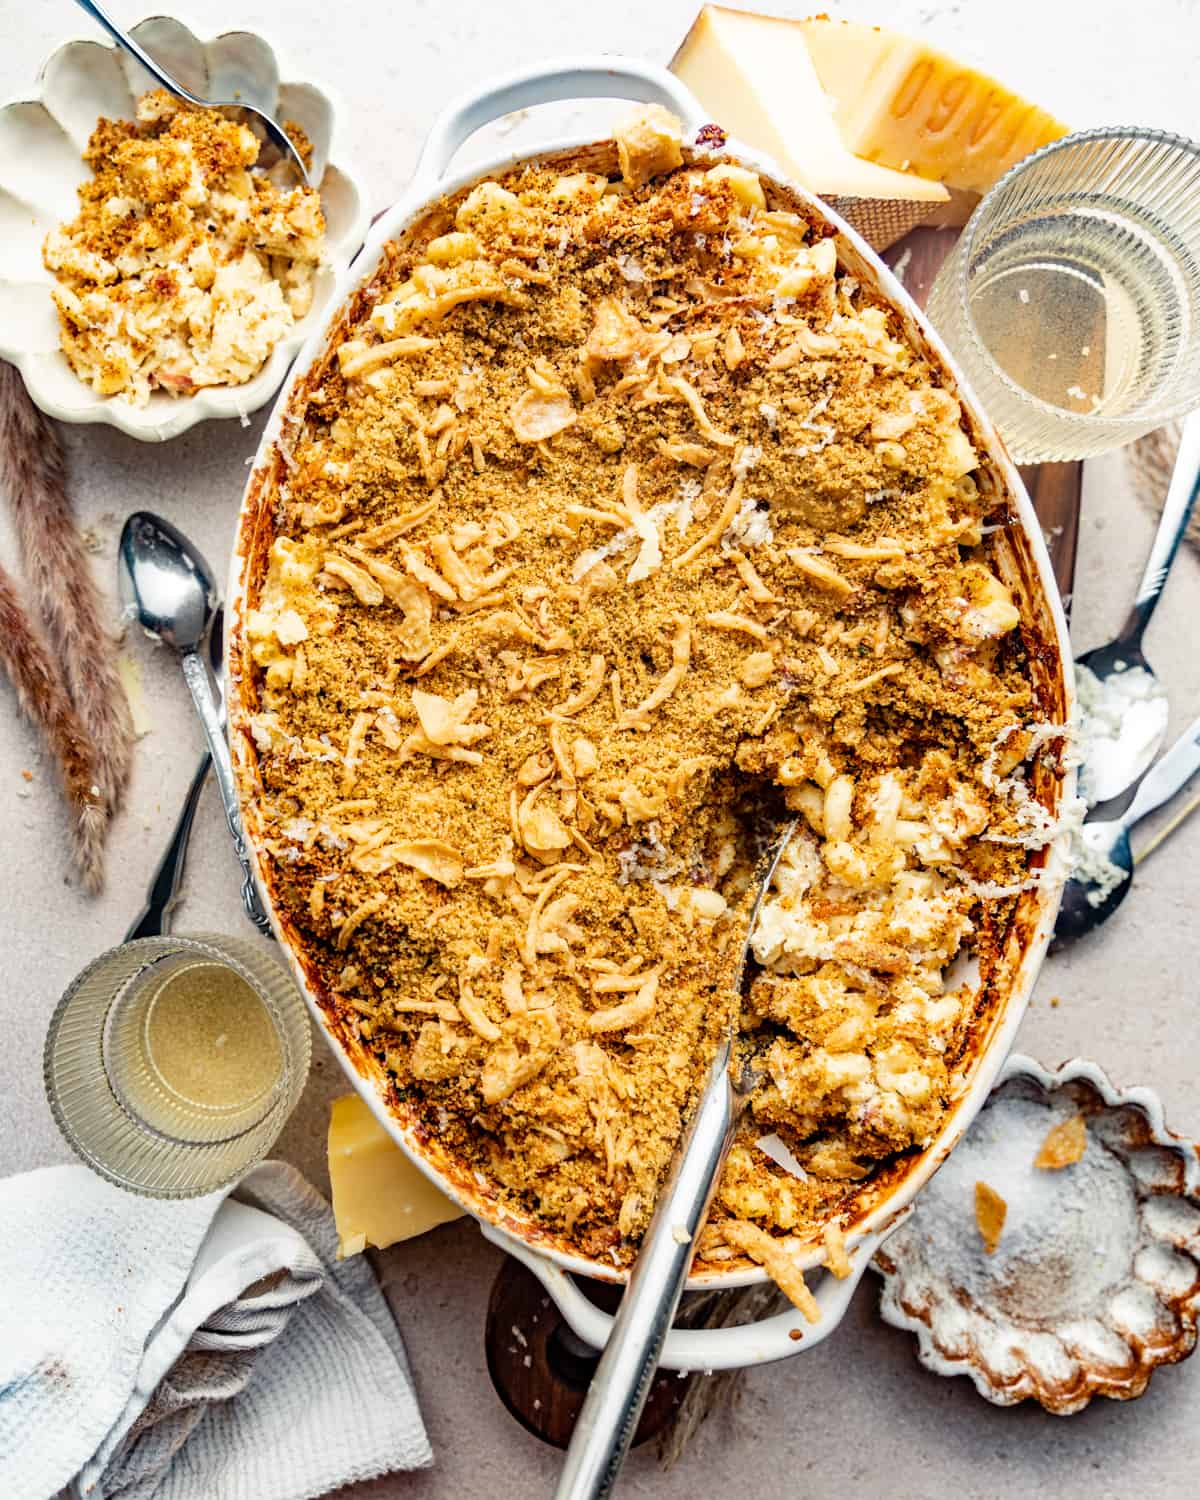 prosciutto mac and cheese in a baking dish surrounded by cheeses, spoons, and glasses.